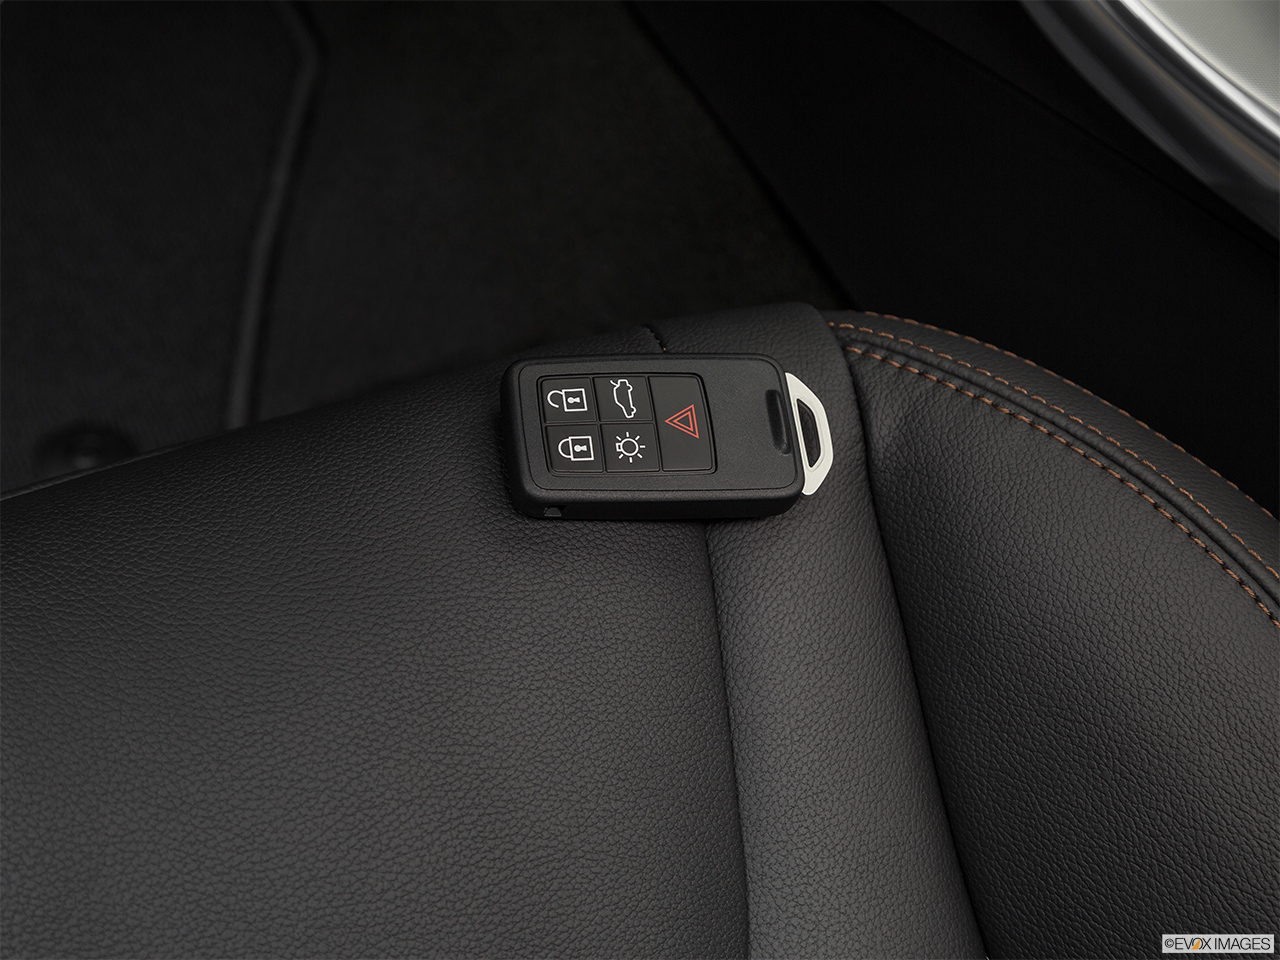 2017 Volvo V60 Cross Country T5 AWD Key fob on driver's seat. 